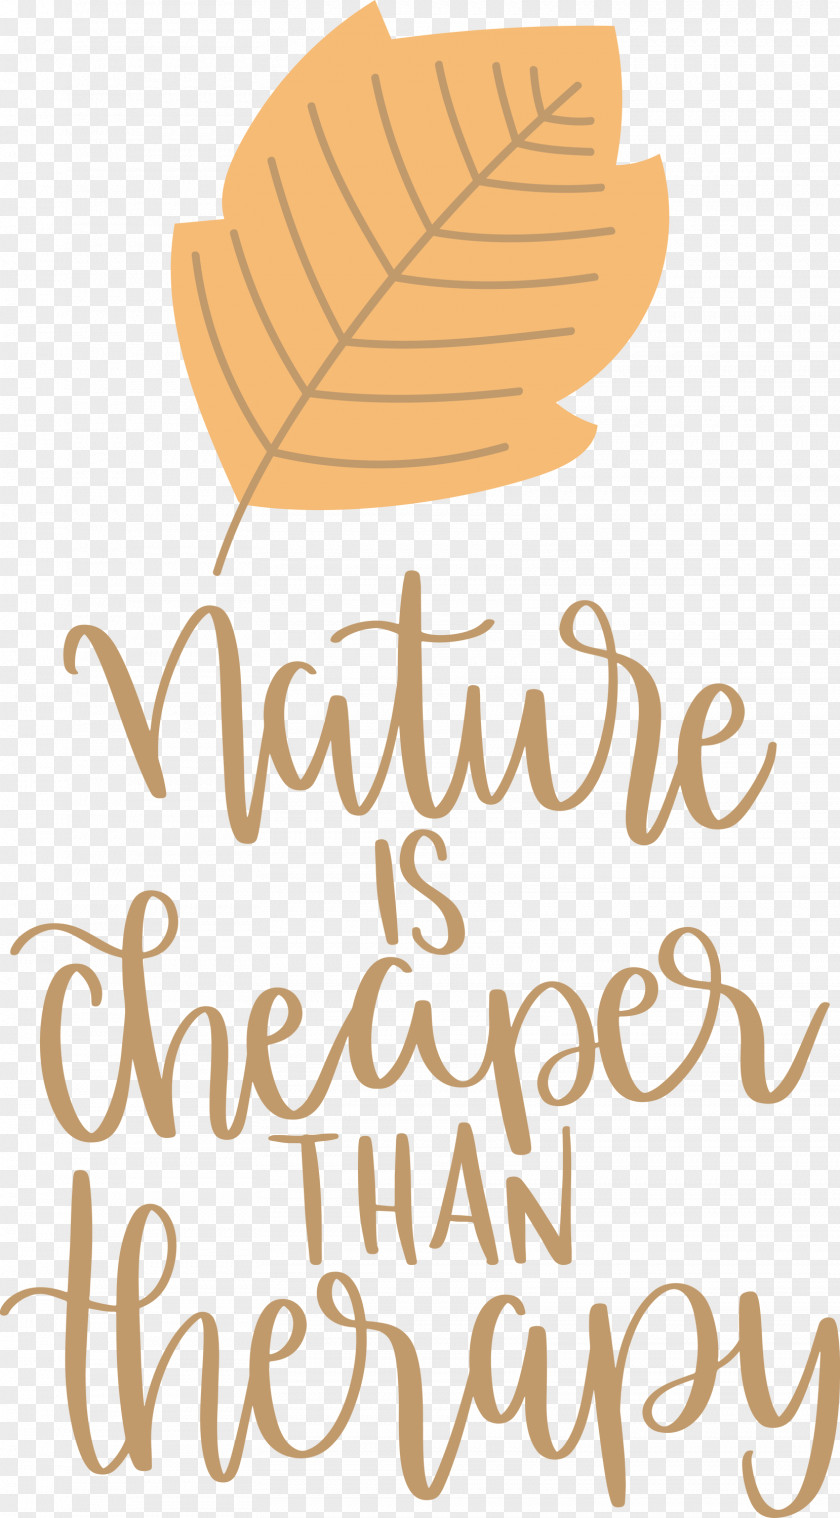 Nature Is Cheaper Than Therapy PNG